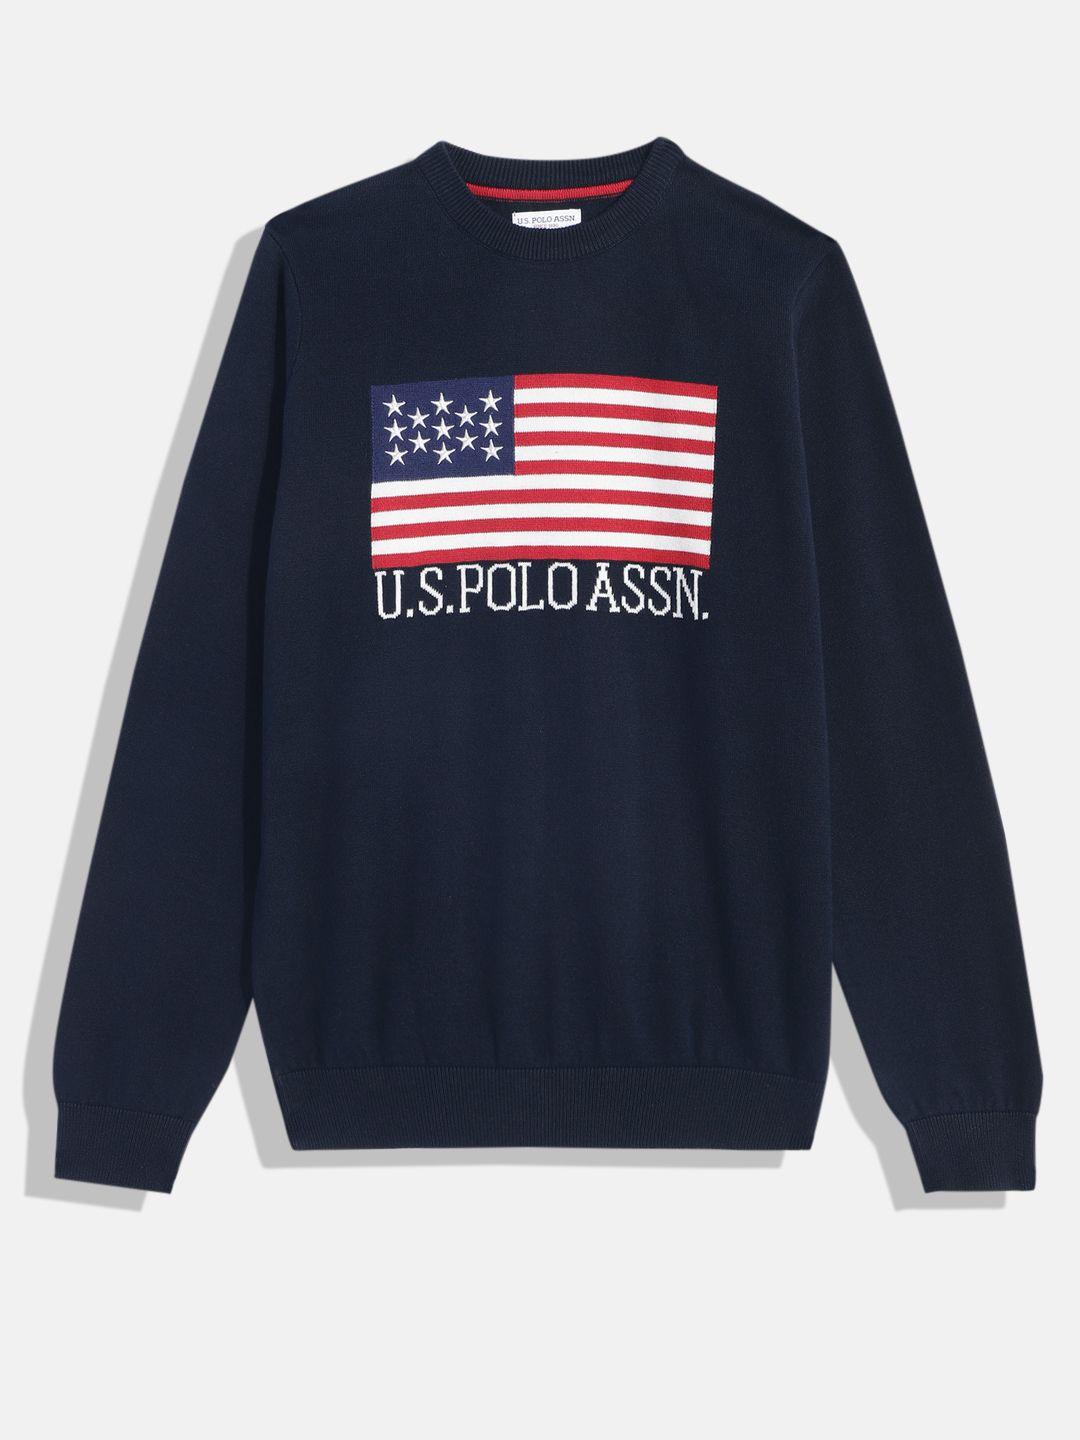 u.s. polo assn. kids boys navy blue printed pure cotton pullover